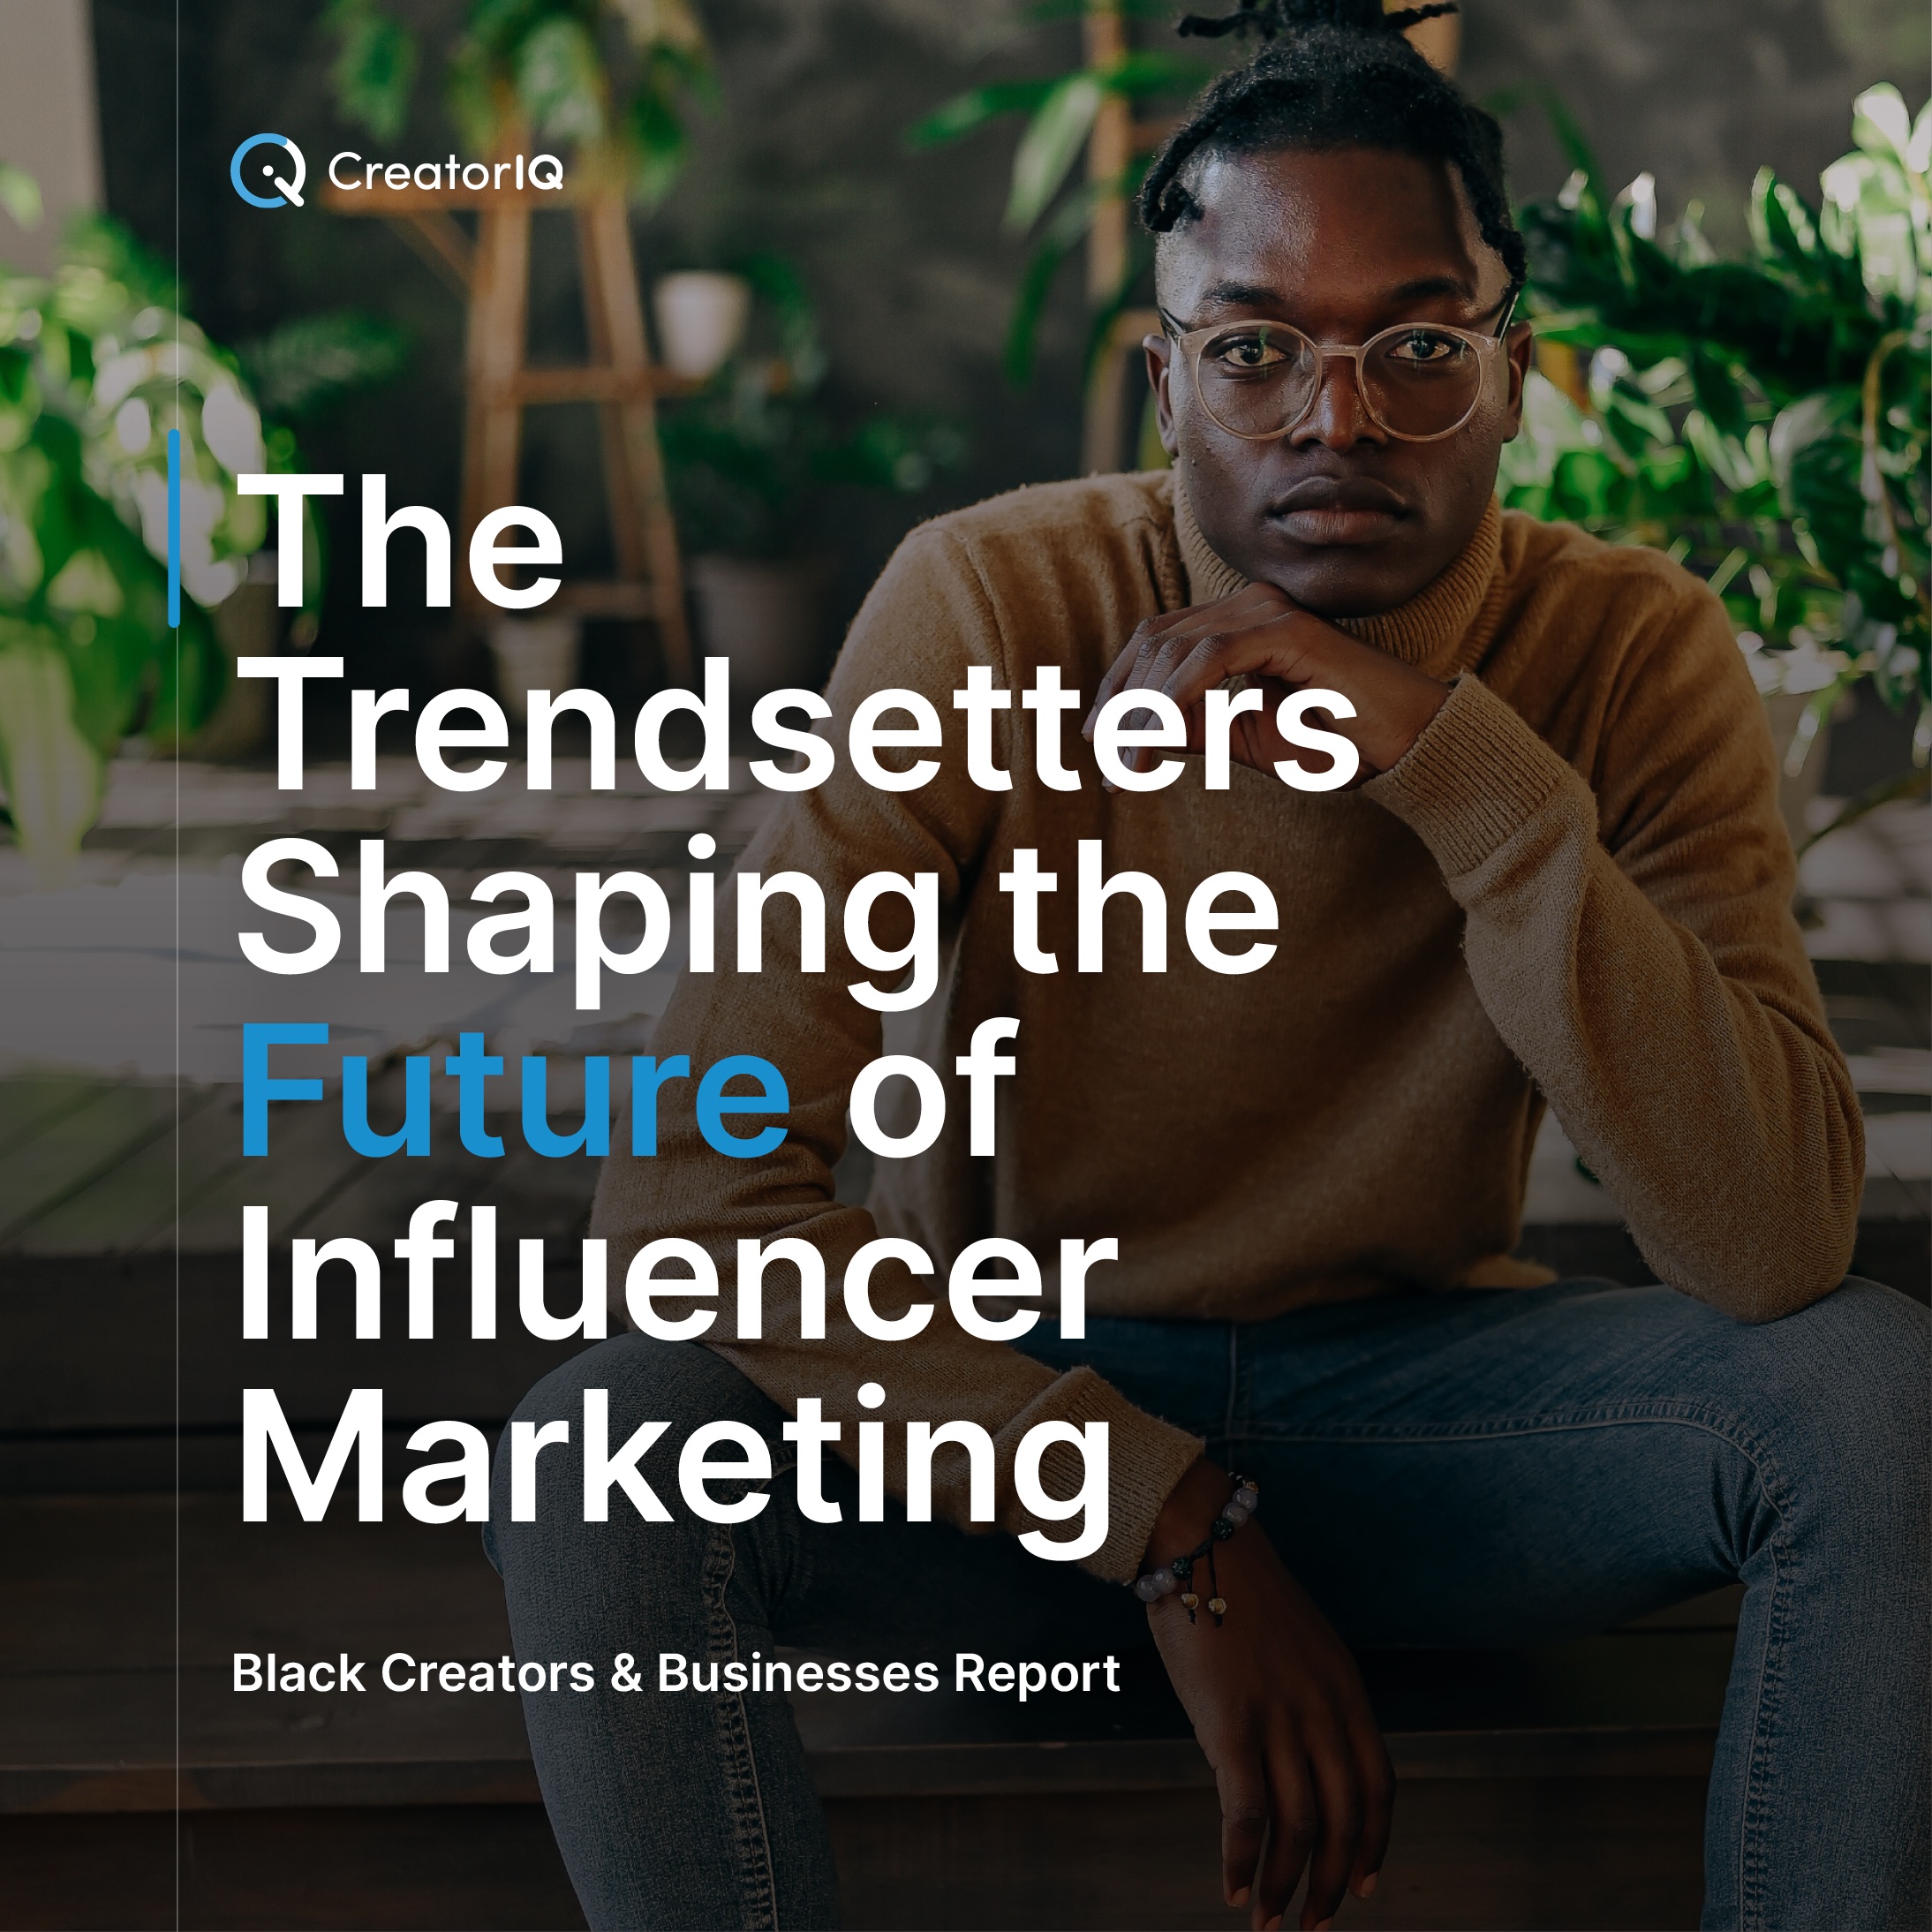 The Trendsetters Shaping the Future of Influencer Marketing